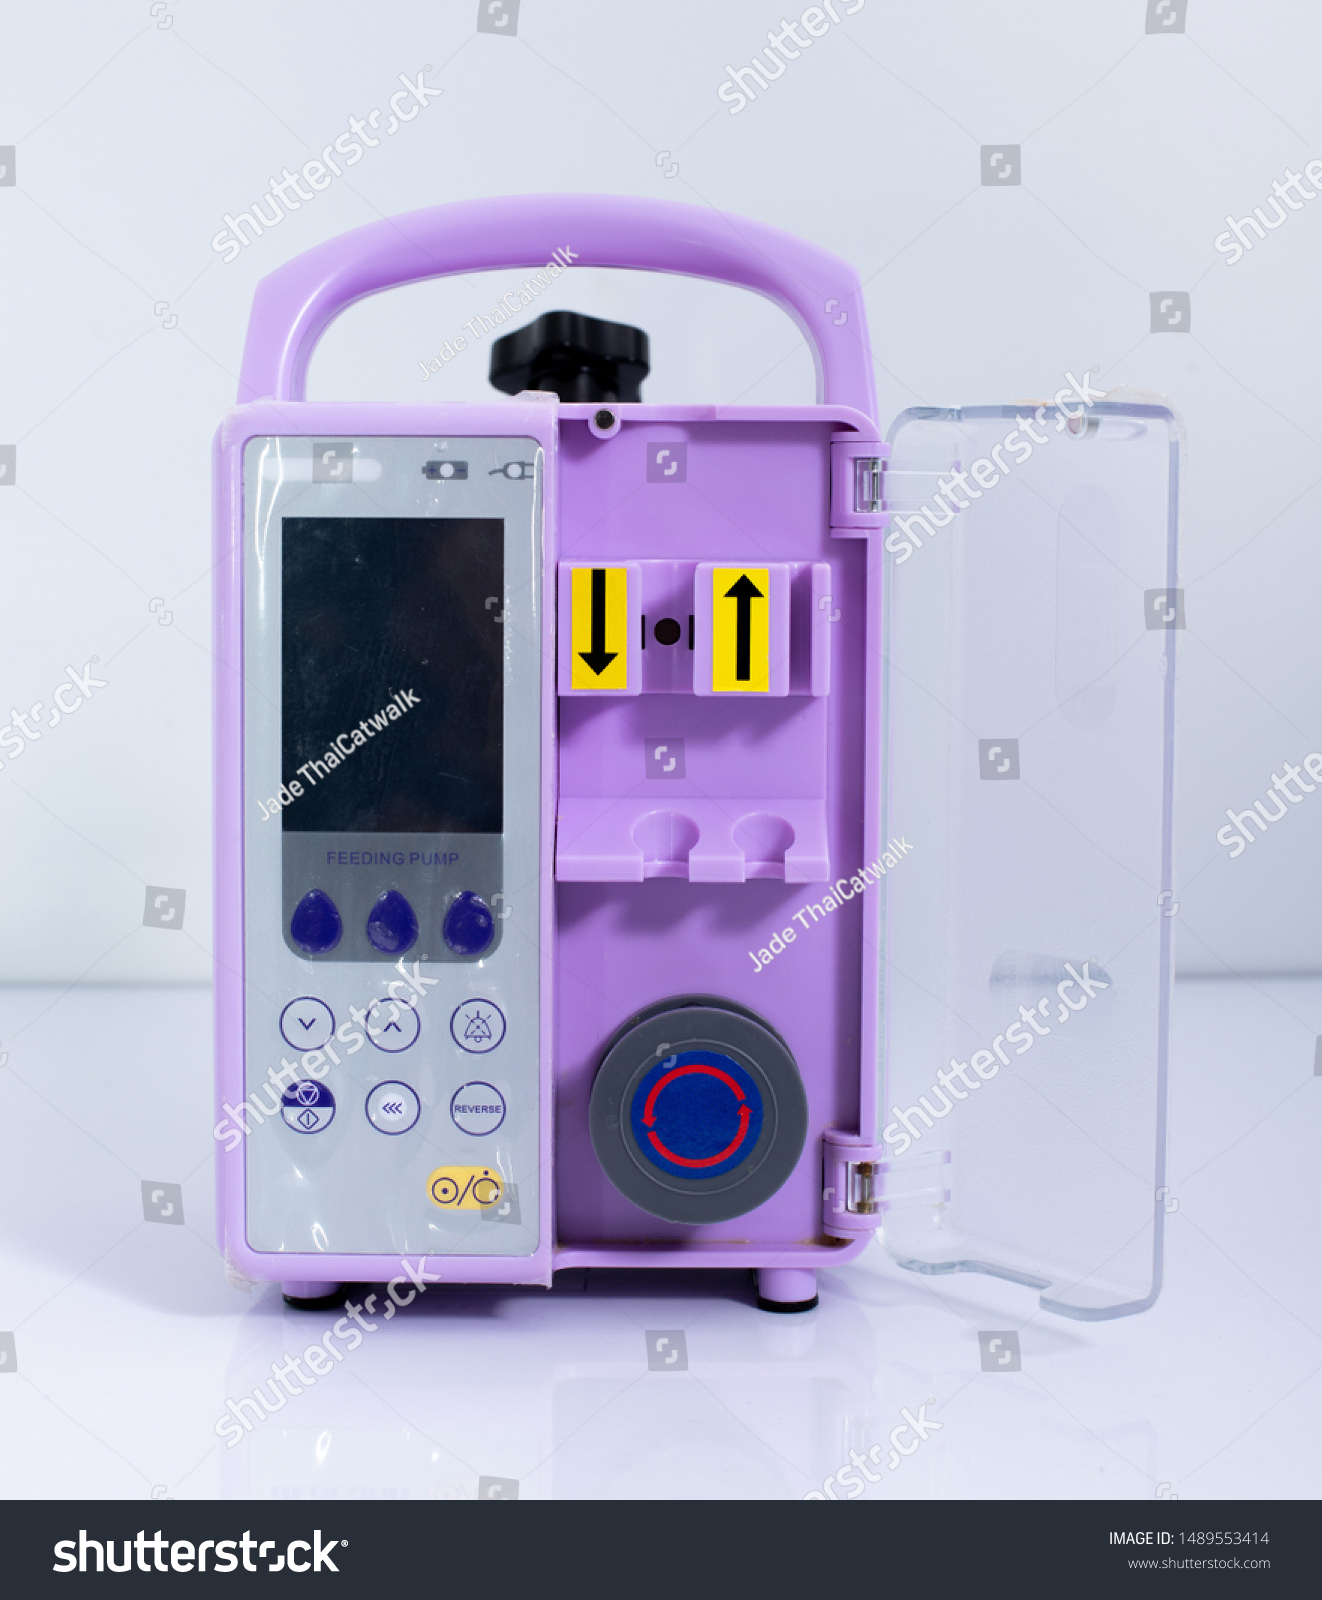 Feeding Pump medical device purple color to supplement nutrition liquid food to tube Enteral feeding fluid set bag #1489553414